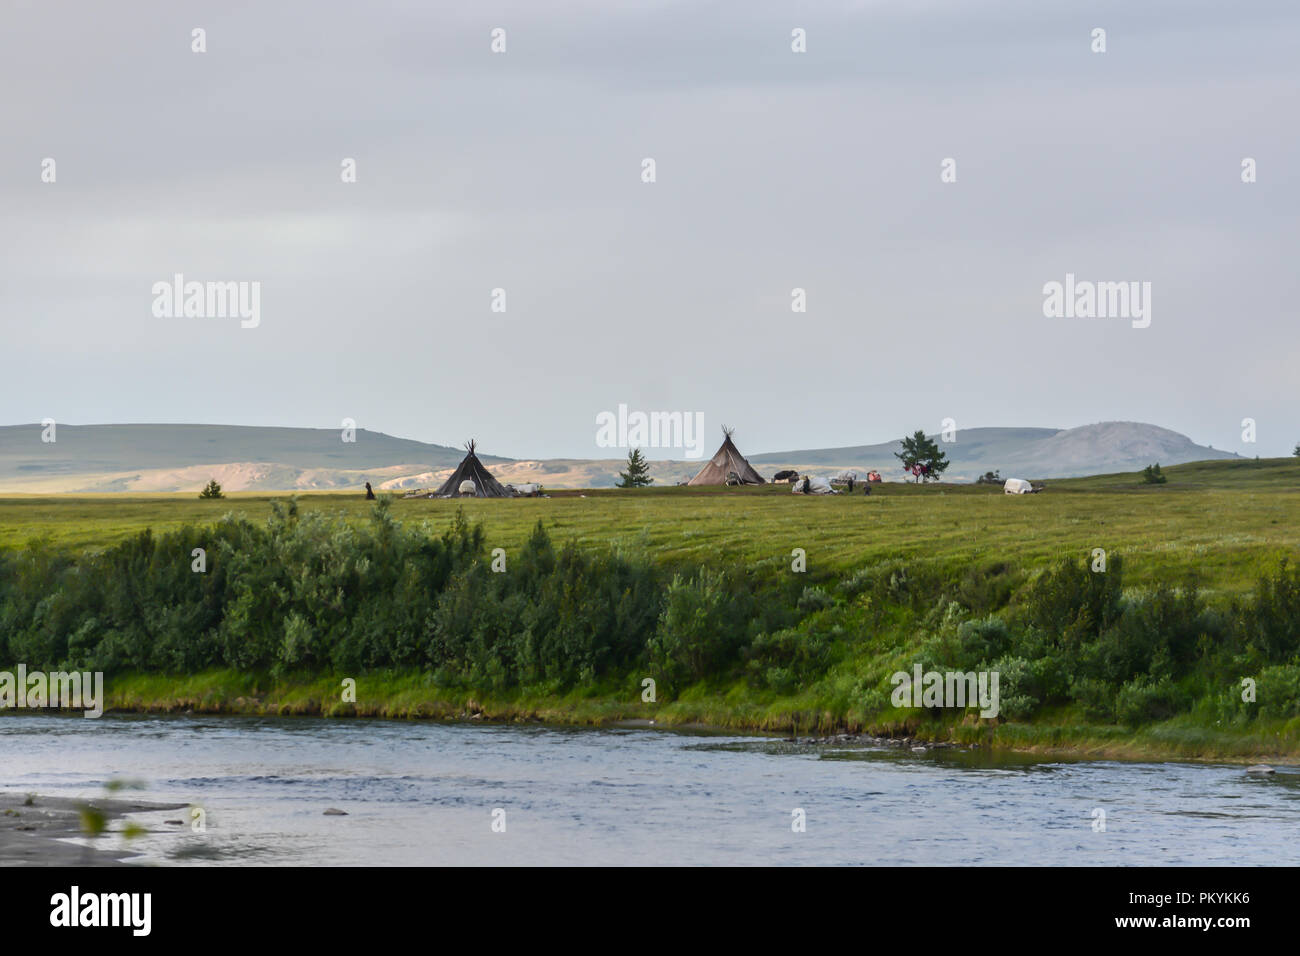 Reindeer herders camp in the natural Park of the Polar Urals. Dwellings of the Nenets on Yamal. Stock Photo